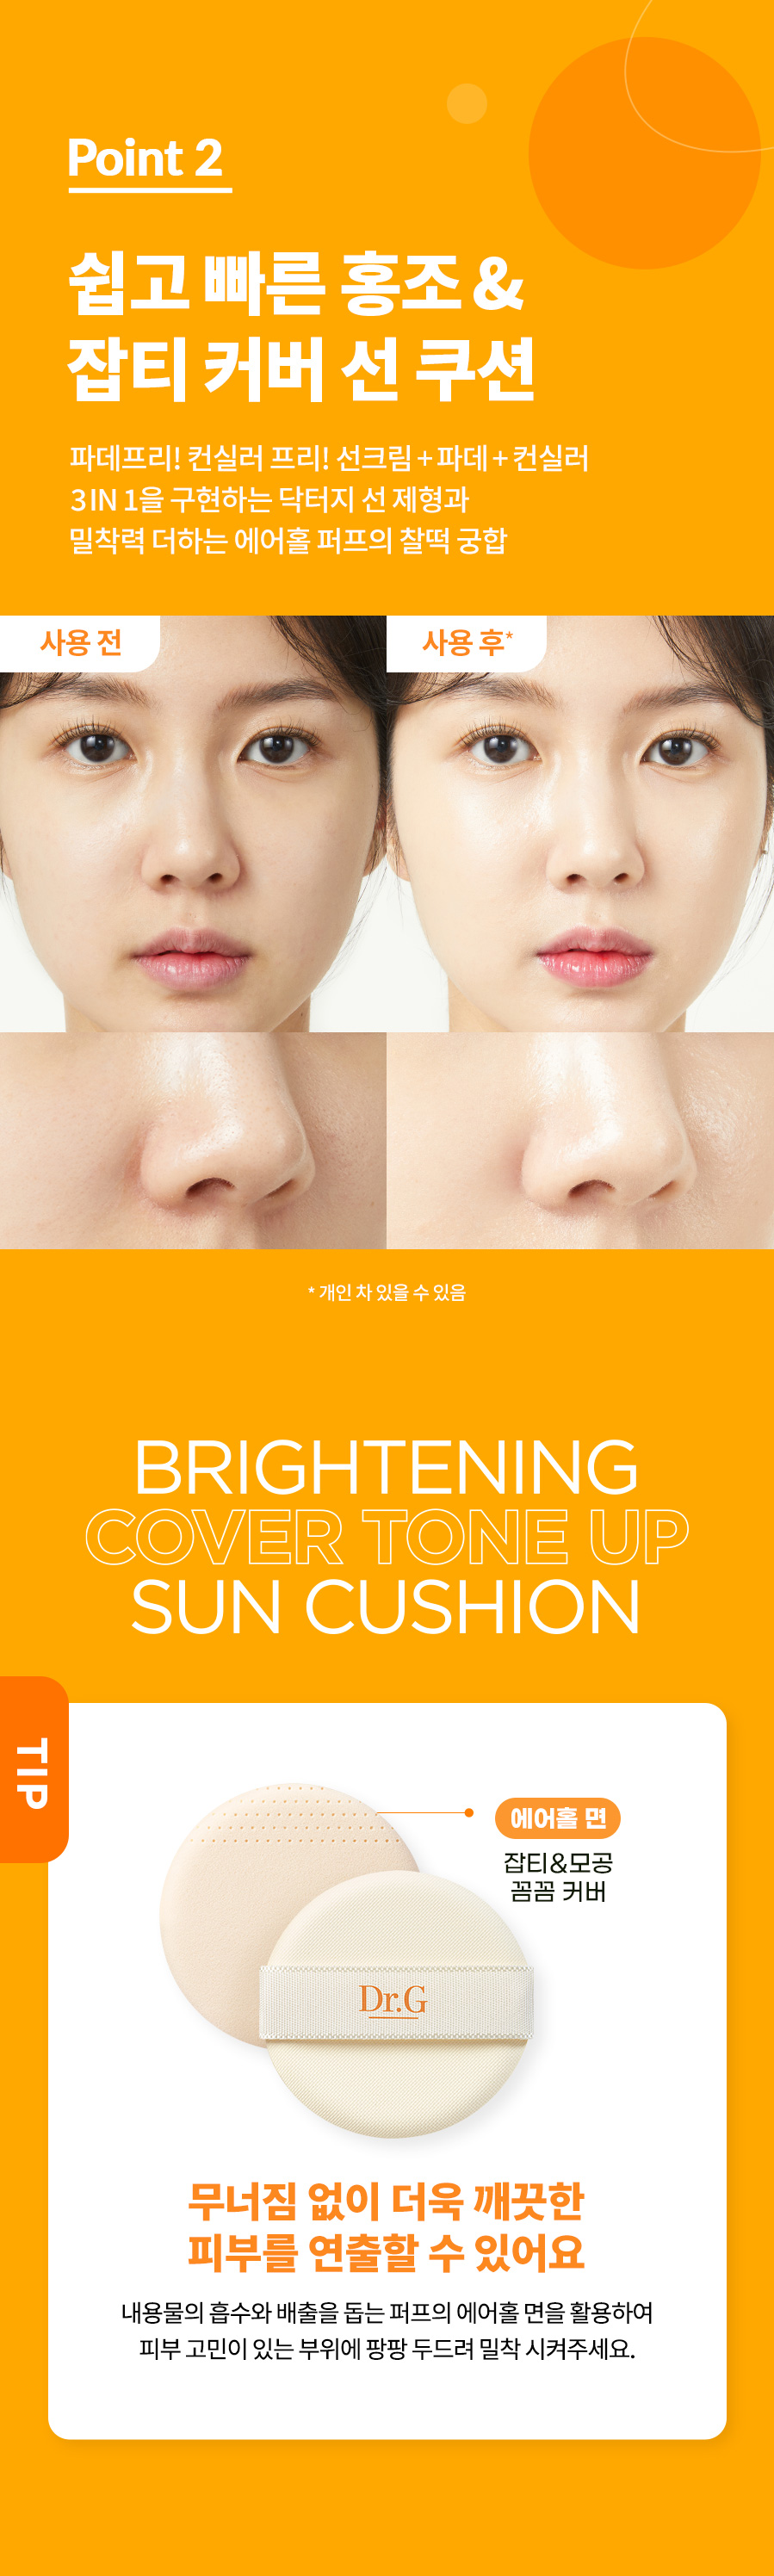 Dr.G - Brightening Cover Tone Up Sun Cushion SPF50+ PA++++ - 15g